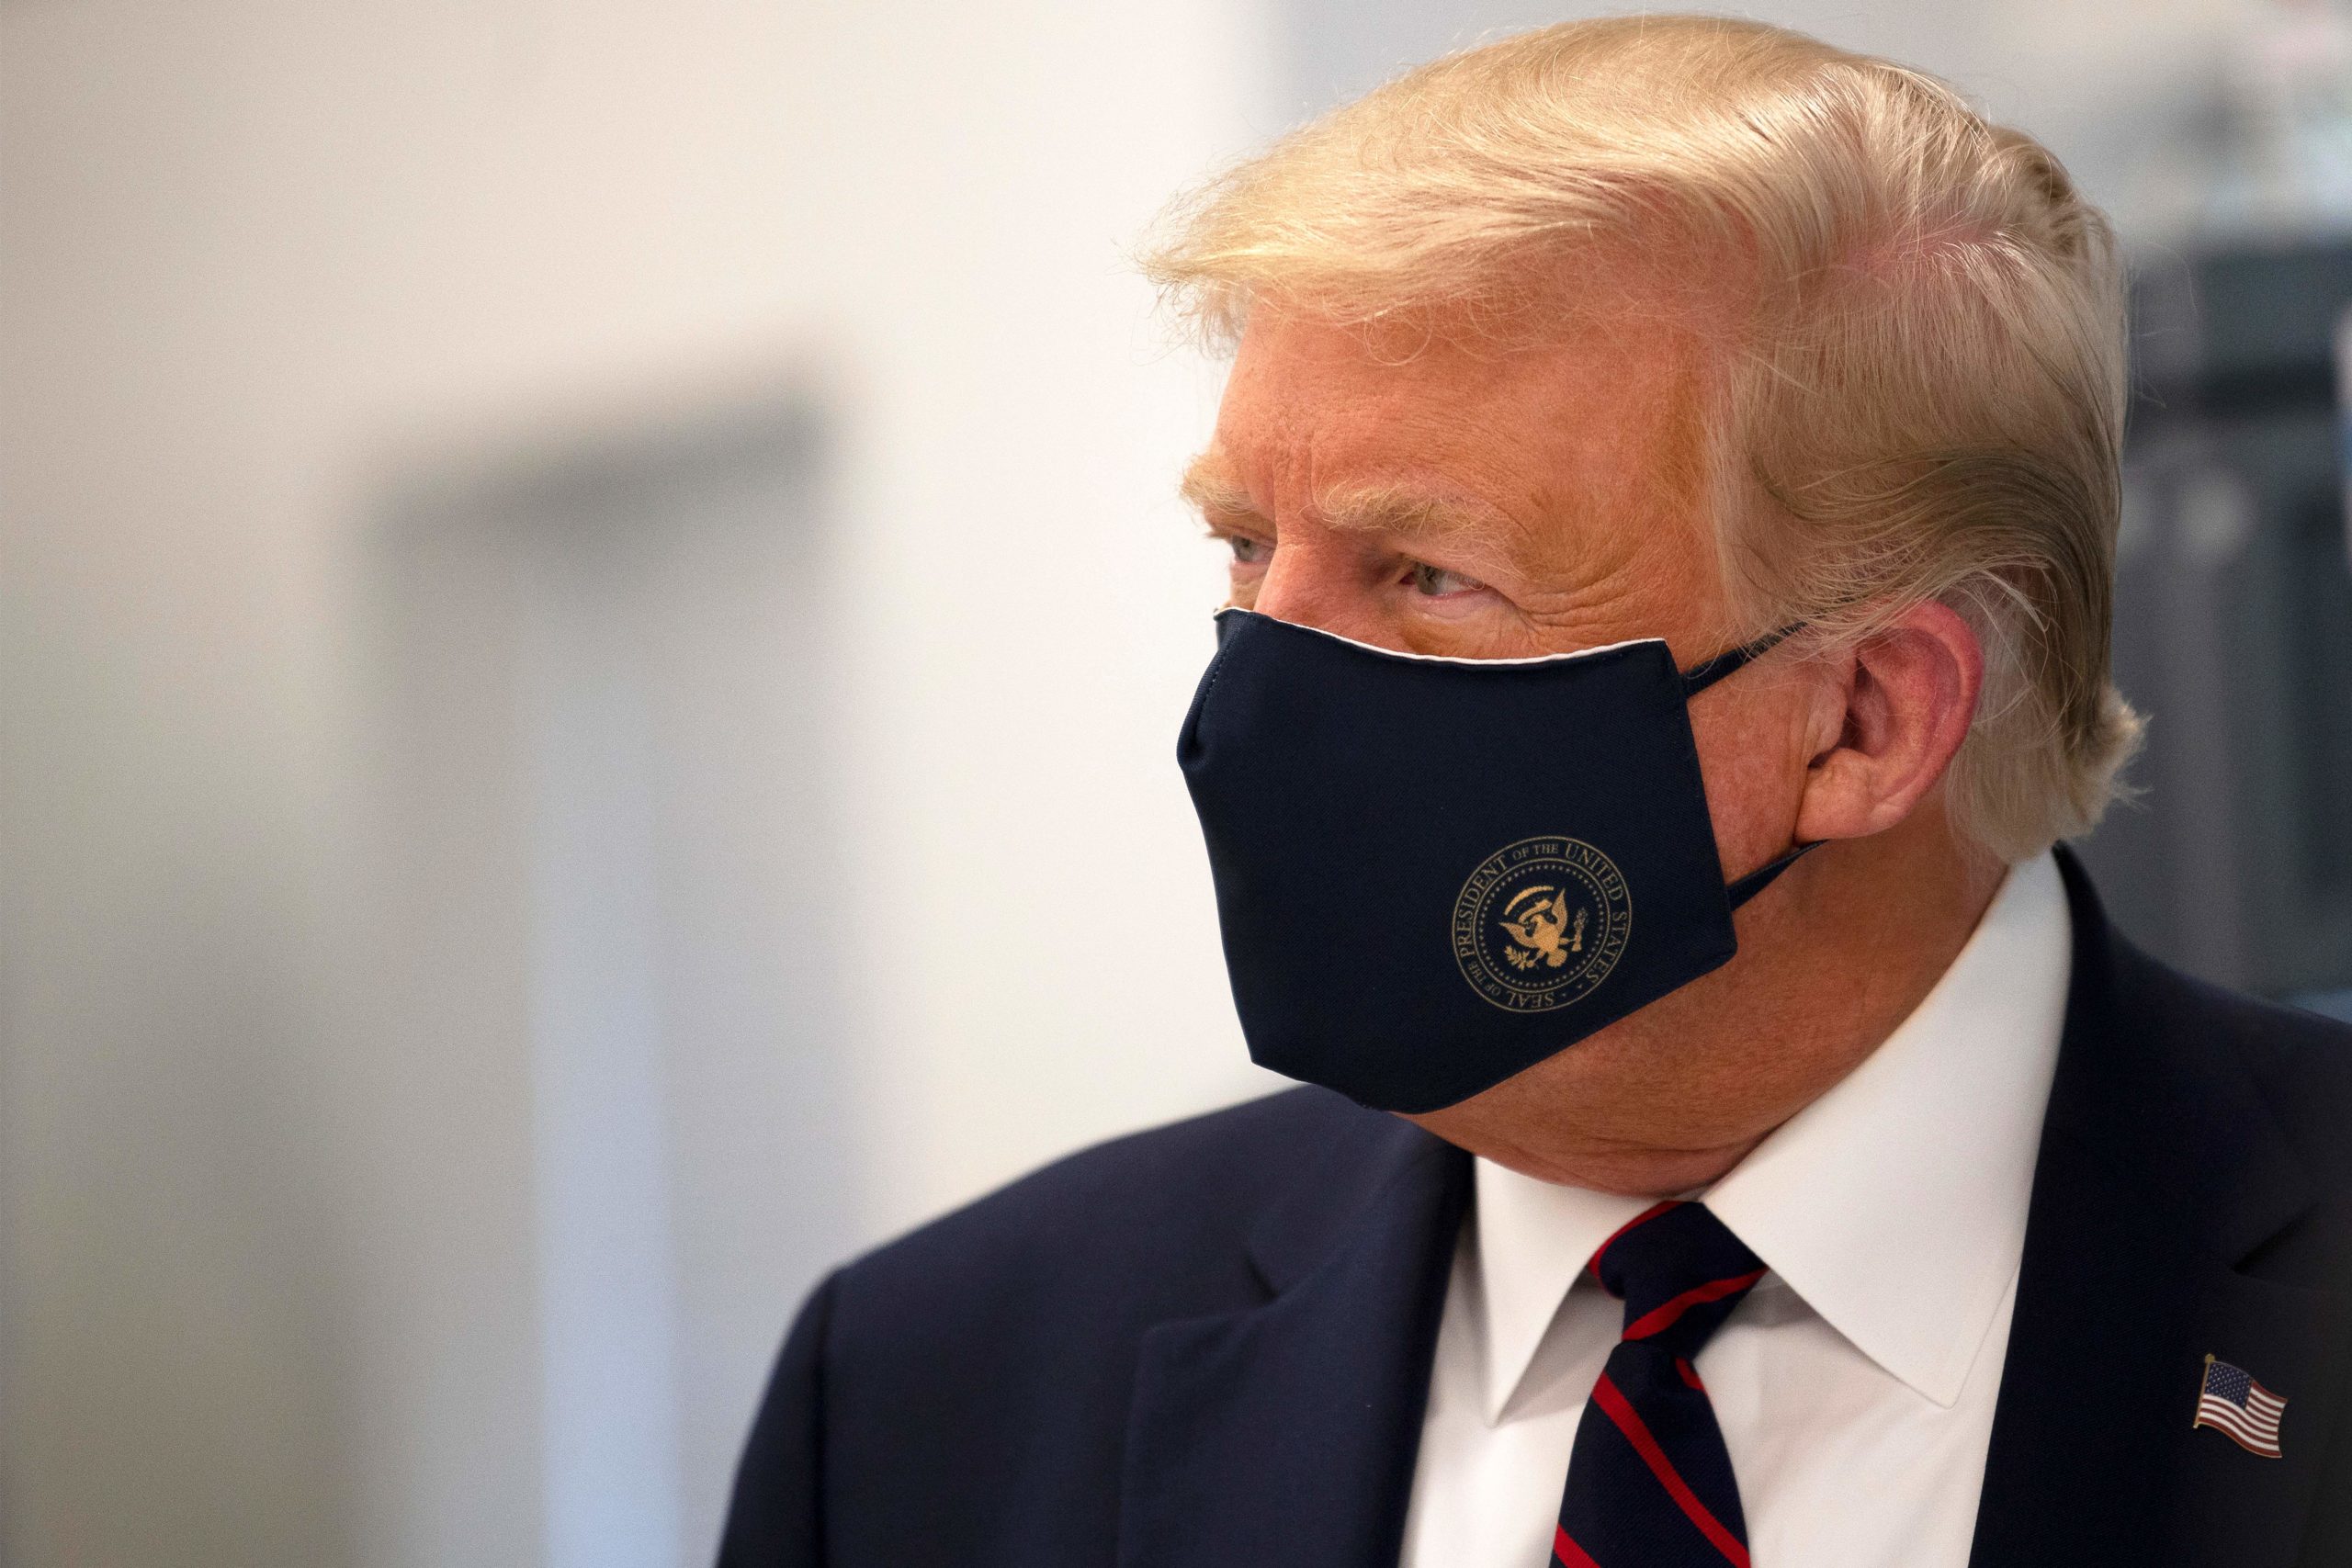 TOPSHOT - US President Donald Trump wears a mask as he tours a lab where they are making components for a potential vaccine at the Bioprocess Innovation Center at Fujifilm Diosynth Biotechnologies in Morrisville, North Carolina on July 27, 2020. (Photo by JIM WATSON / AFP) (Photo by JIM WATSON/AFP via Getty Images)